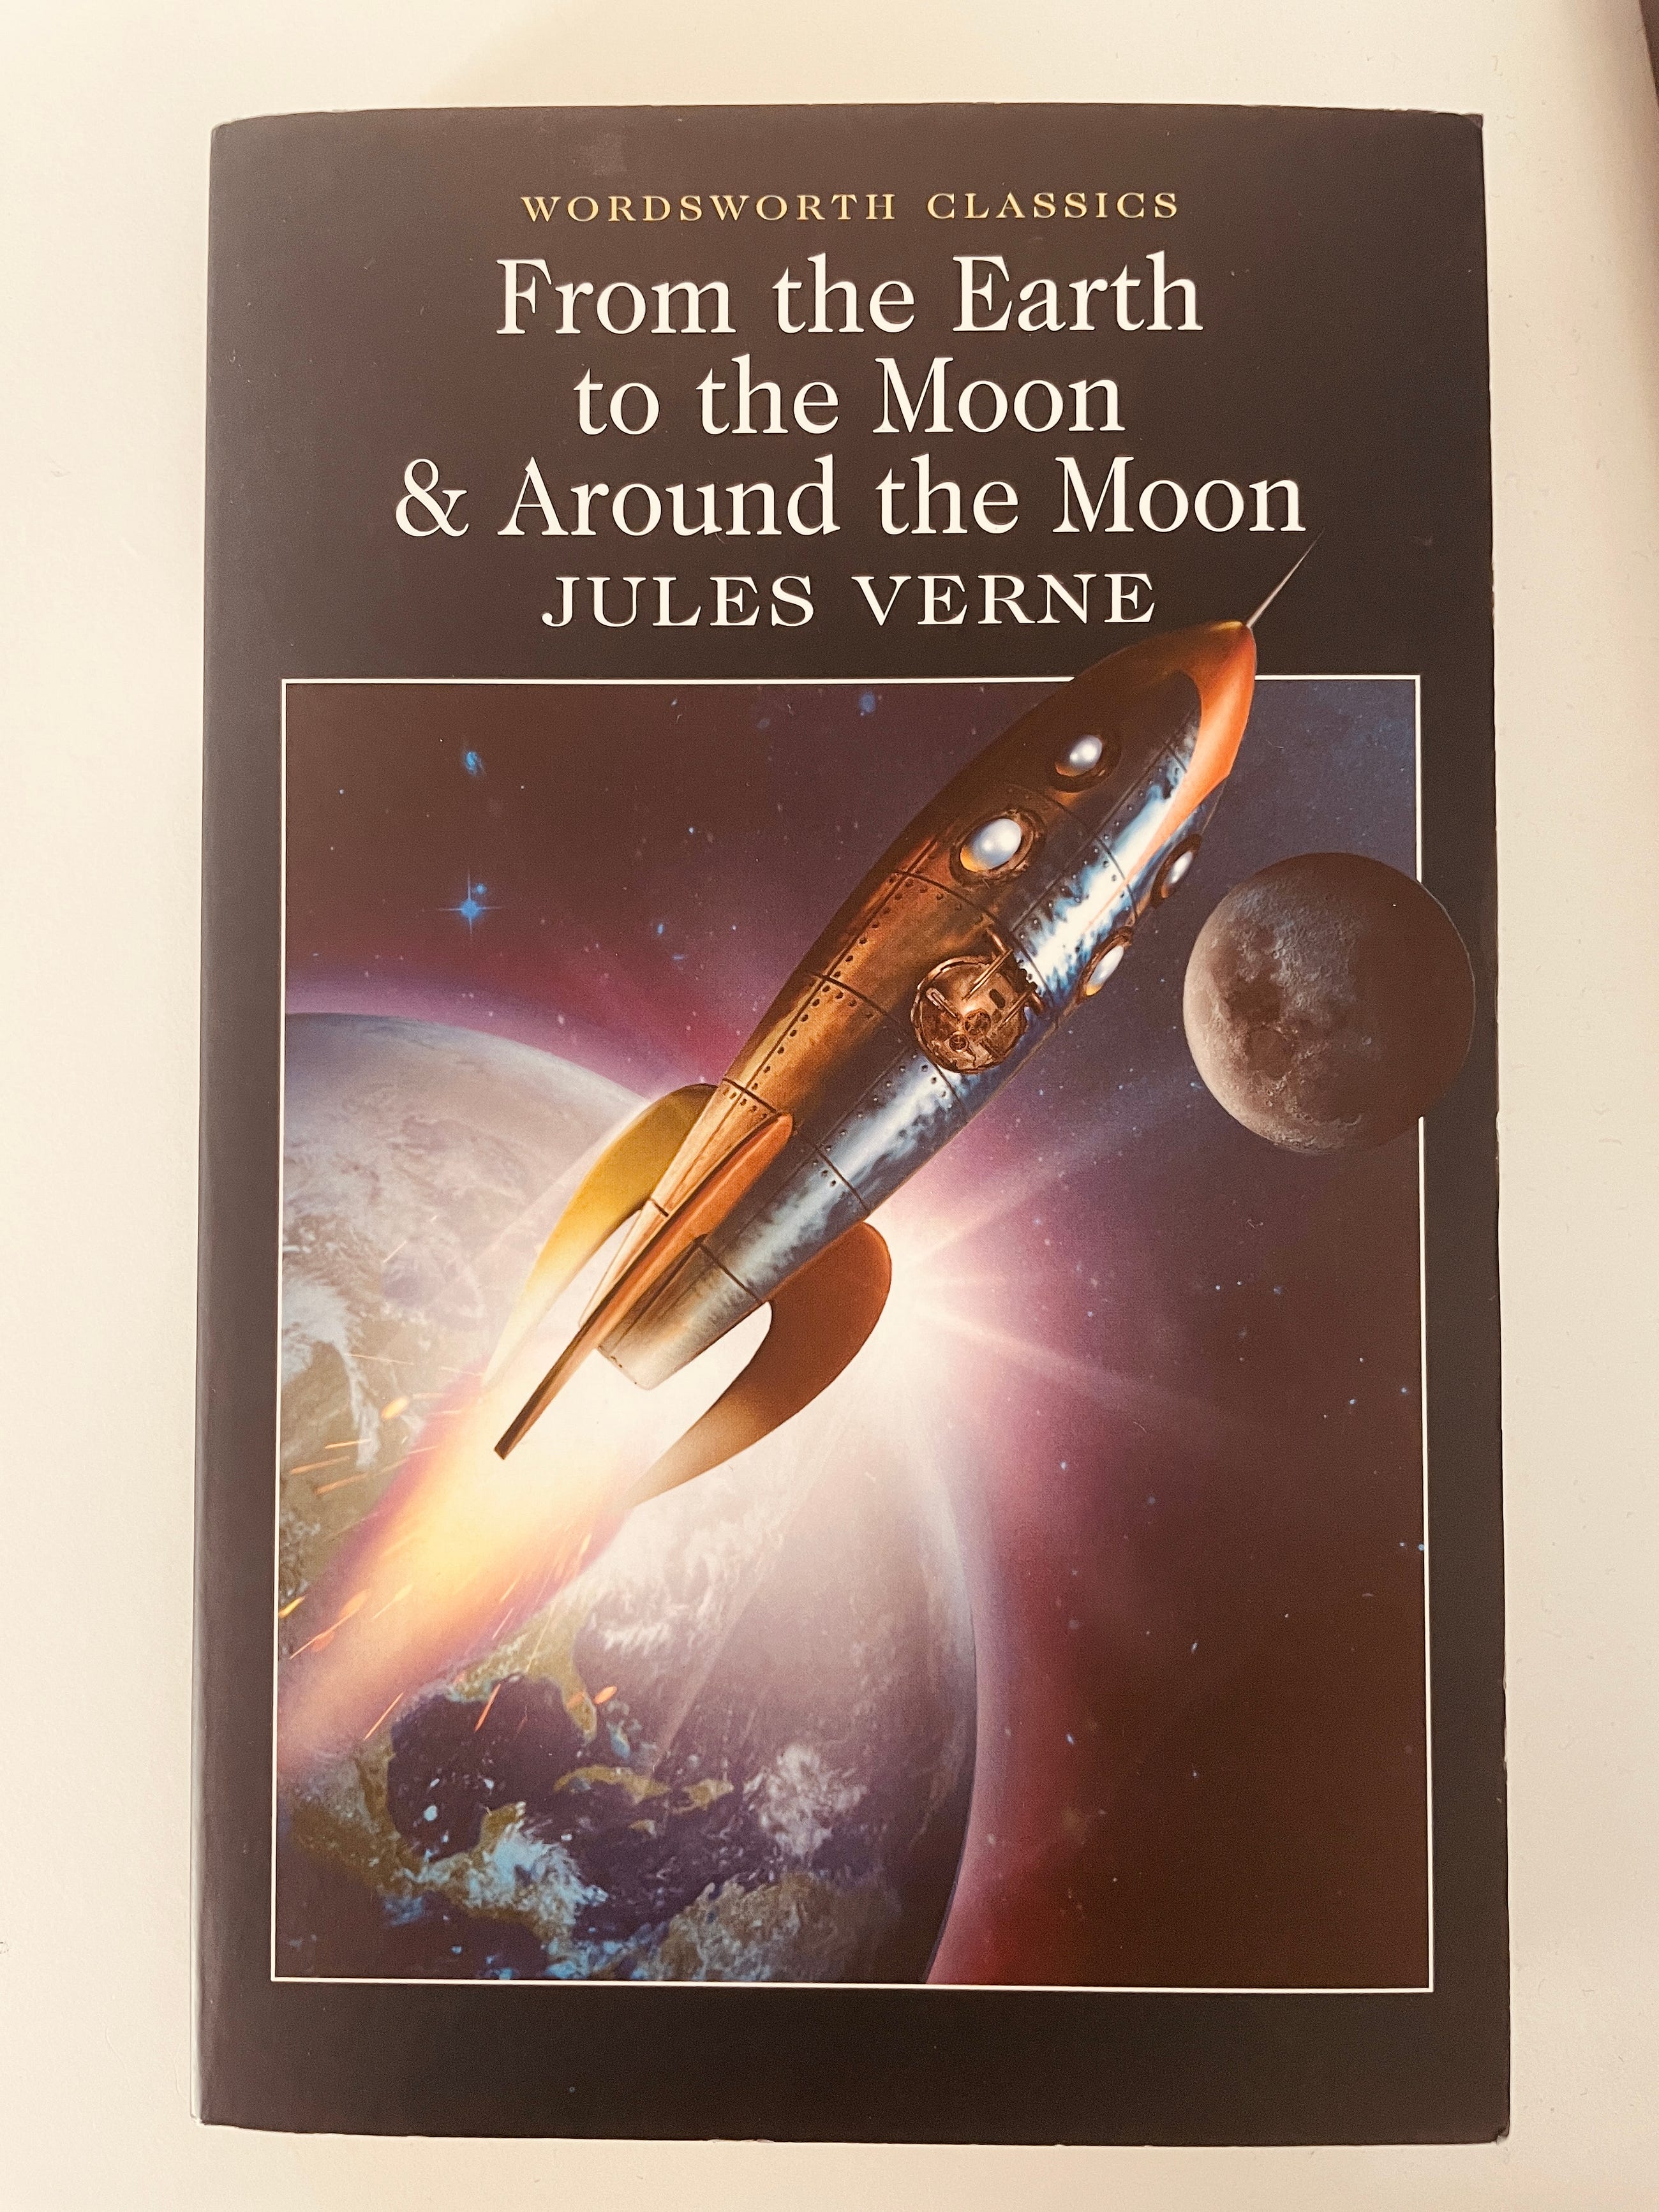 Shooting for the moon. On Verne’s From the Earth to the Moon.